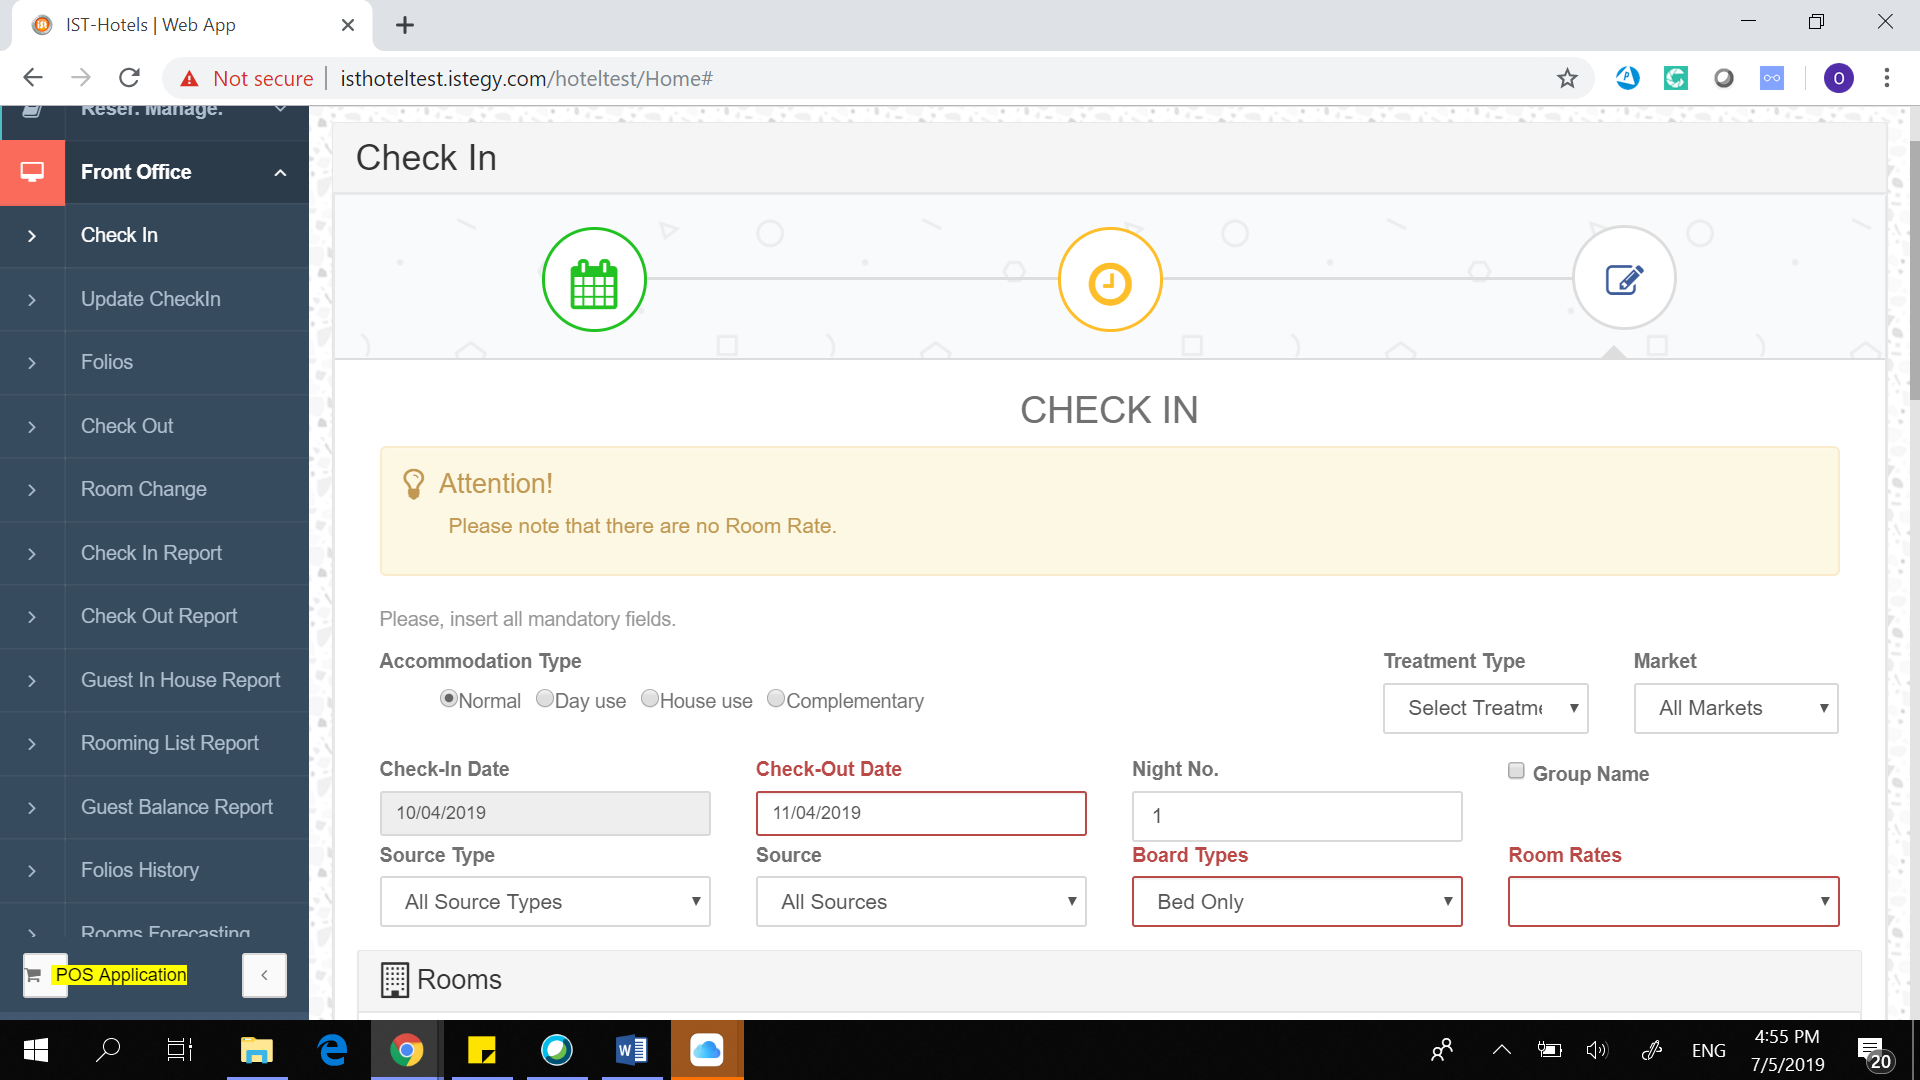 Hotel Management System front office check-in screenshot